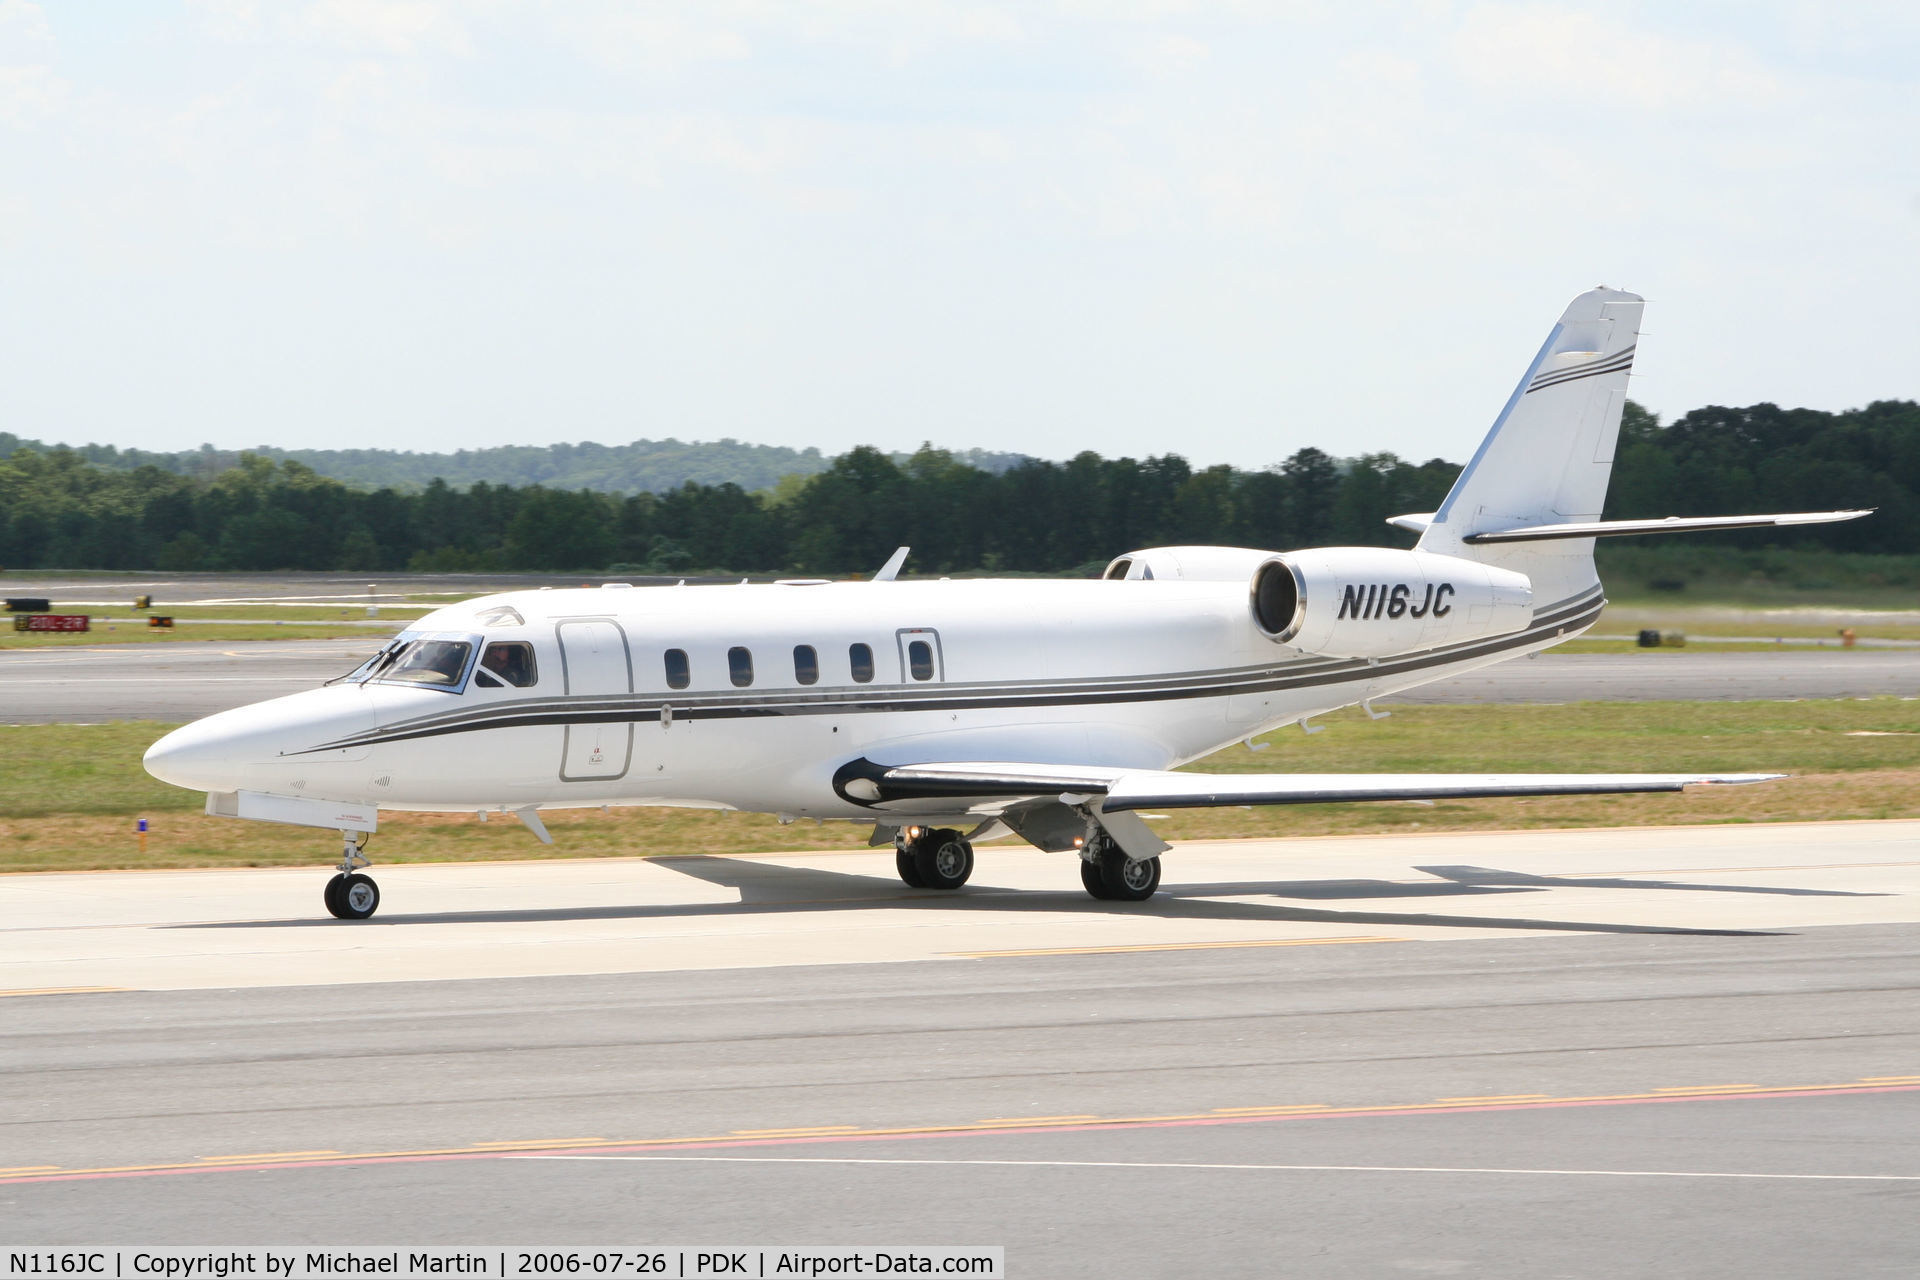 N116JC, Israel Aircraft Industries IAI-1125 Westwind Astra C/N 014, Taxing to Epps Air Service